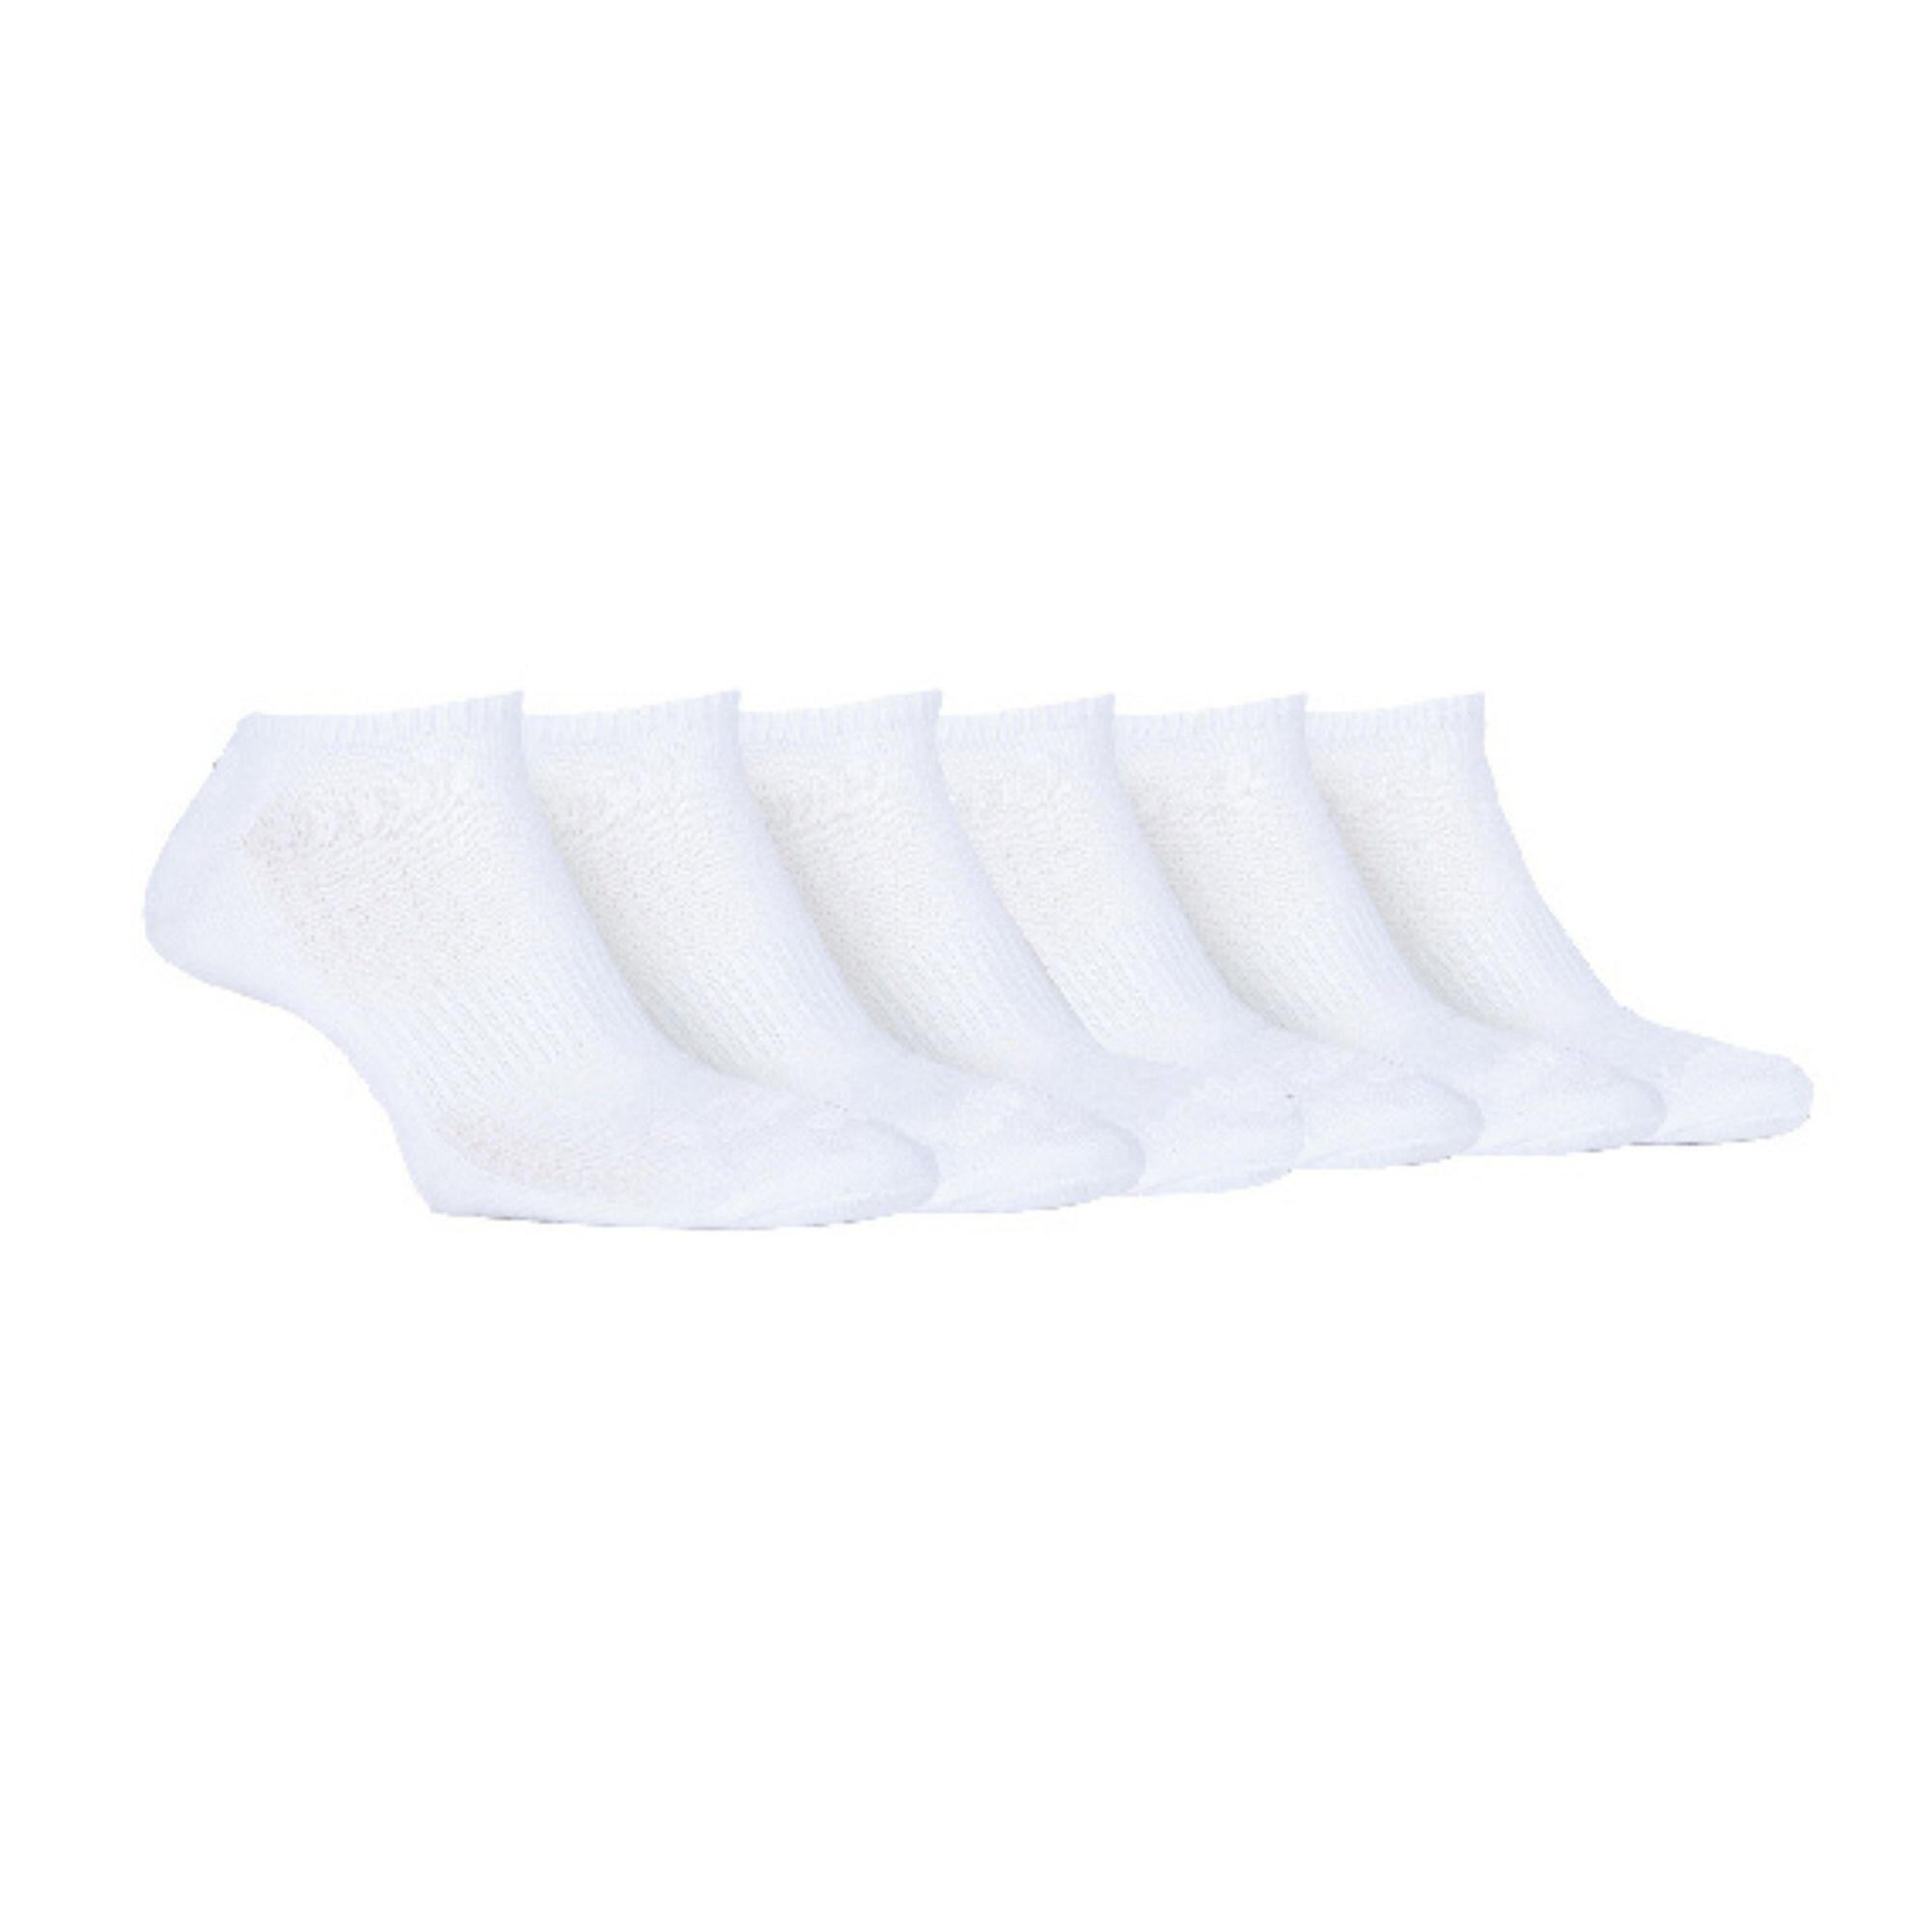 JEEP 6 Pairs Ladies Cotton Cushioned Low Cut Sport Ankle Socks For Running